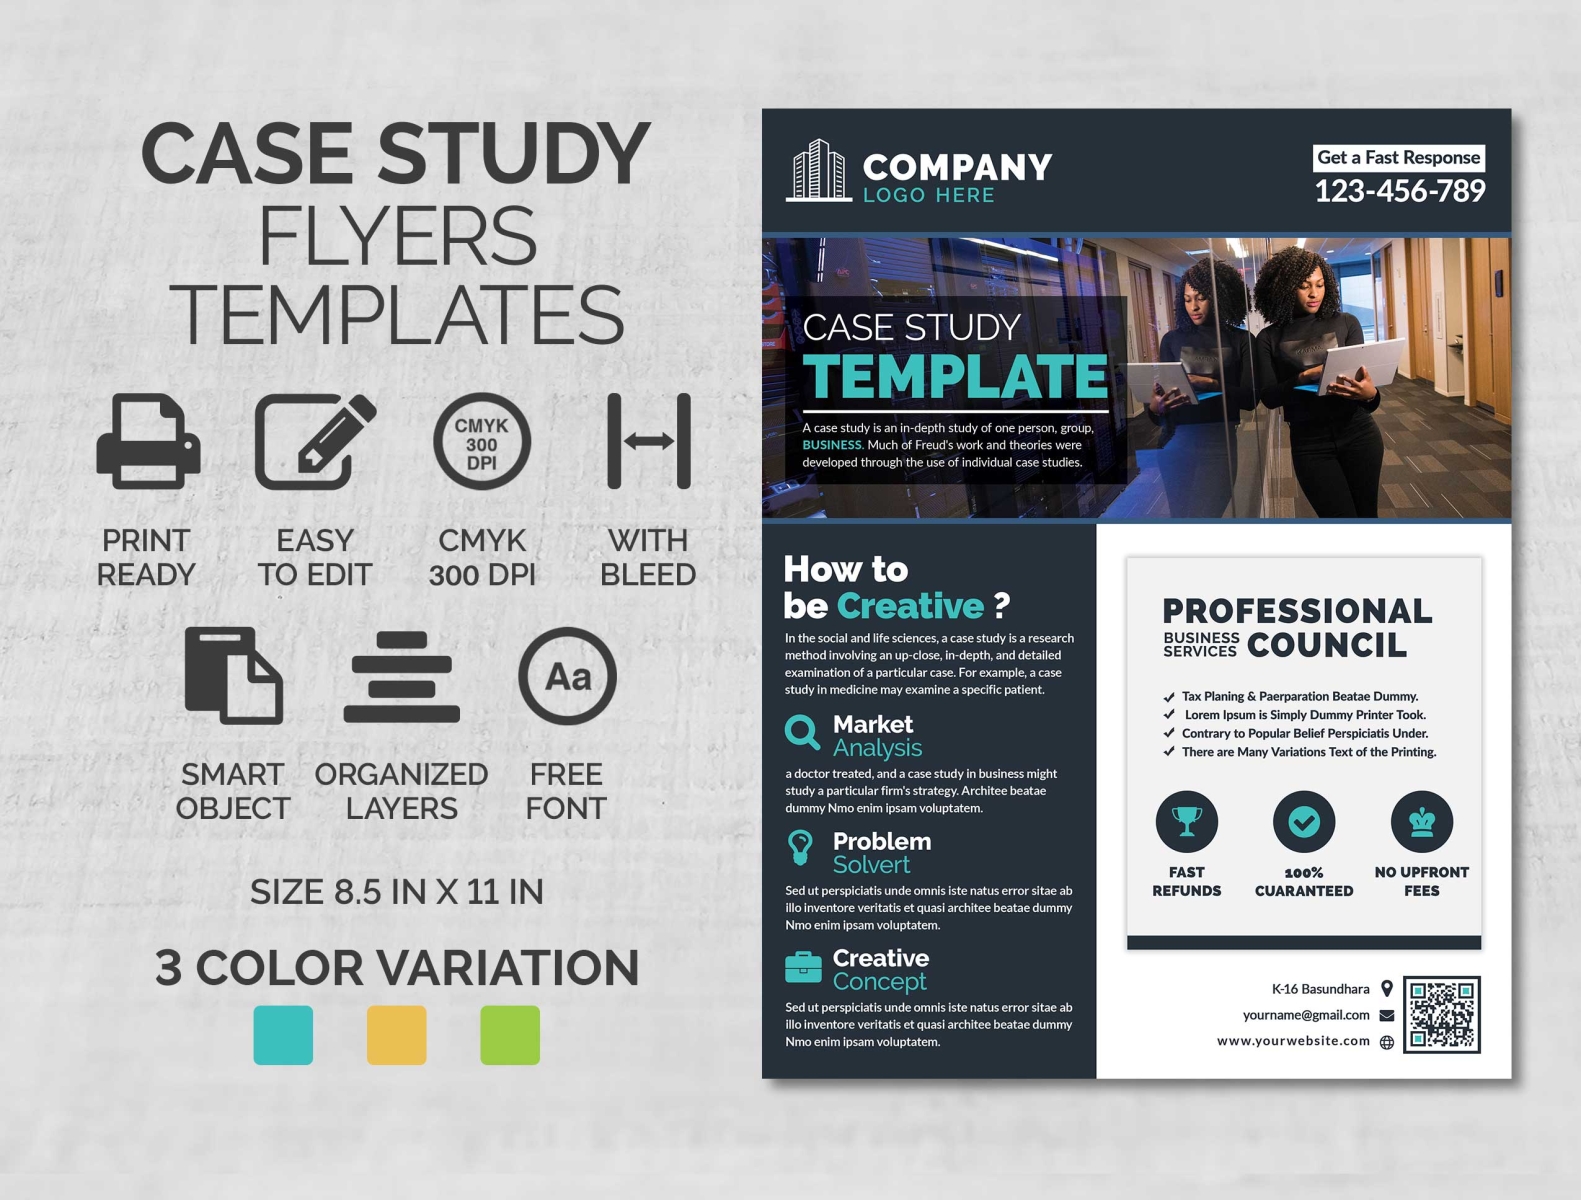 Case Study Flyer Template by Rafix Lam on Dribbble Intended For Research Study Flyer Template